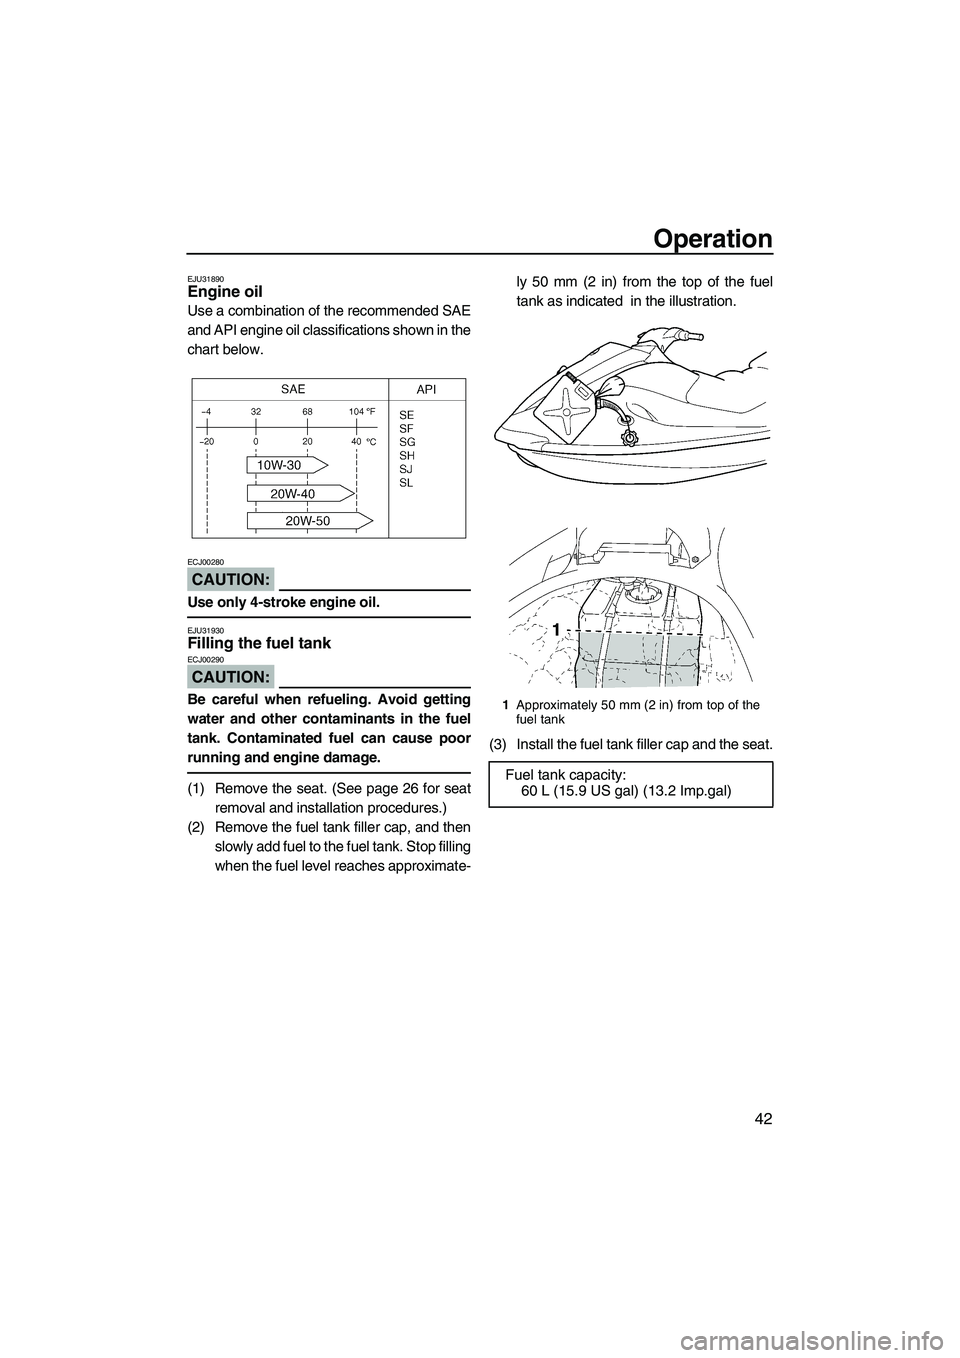 YAMAHA VX 2007  Owners Manual Operation
42
EJU31890Engine oil 
Use a combination of the recommended SAE
and API engine oil classifications shown in the
chart below.
CAUTION:
ECJ00280
Use only 4-stroke engine oil.
EJU31930Filling t